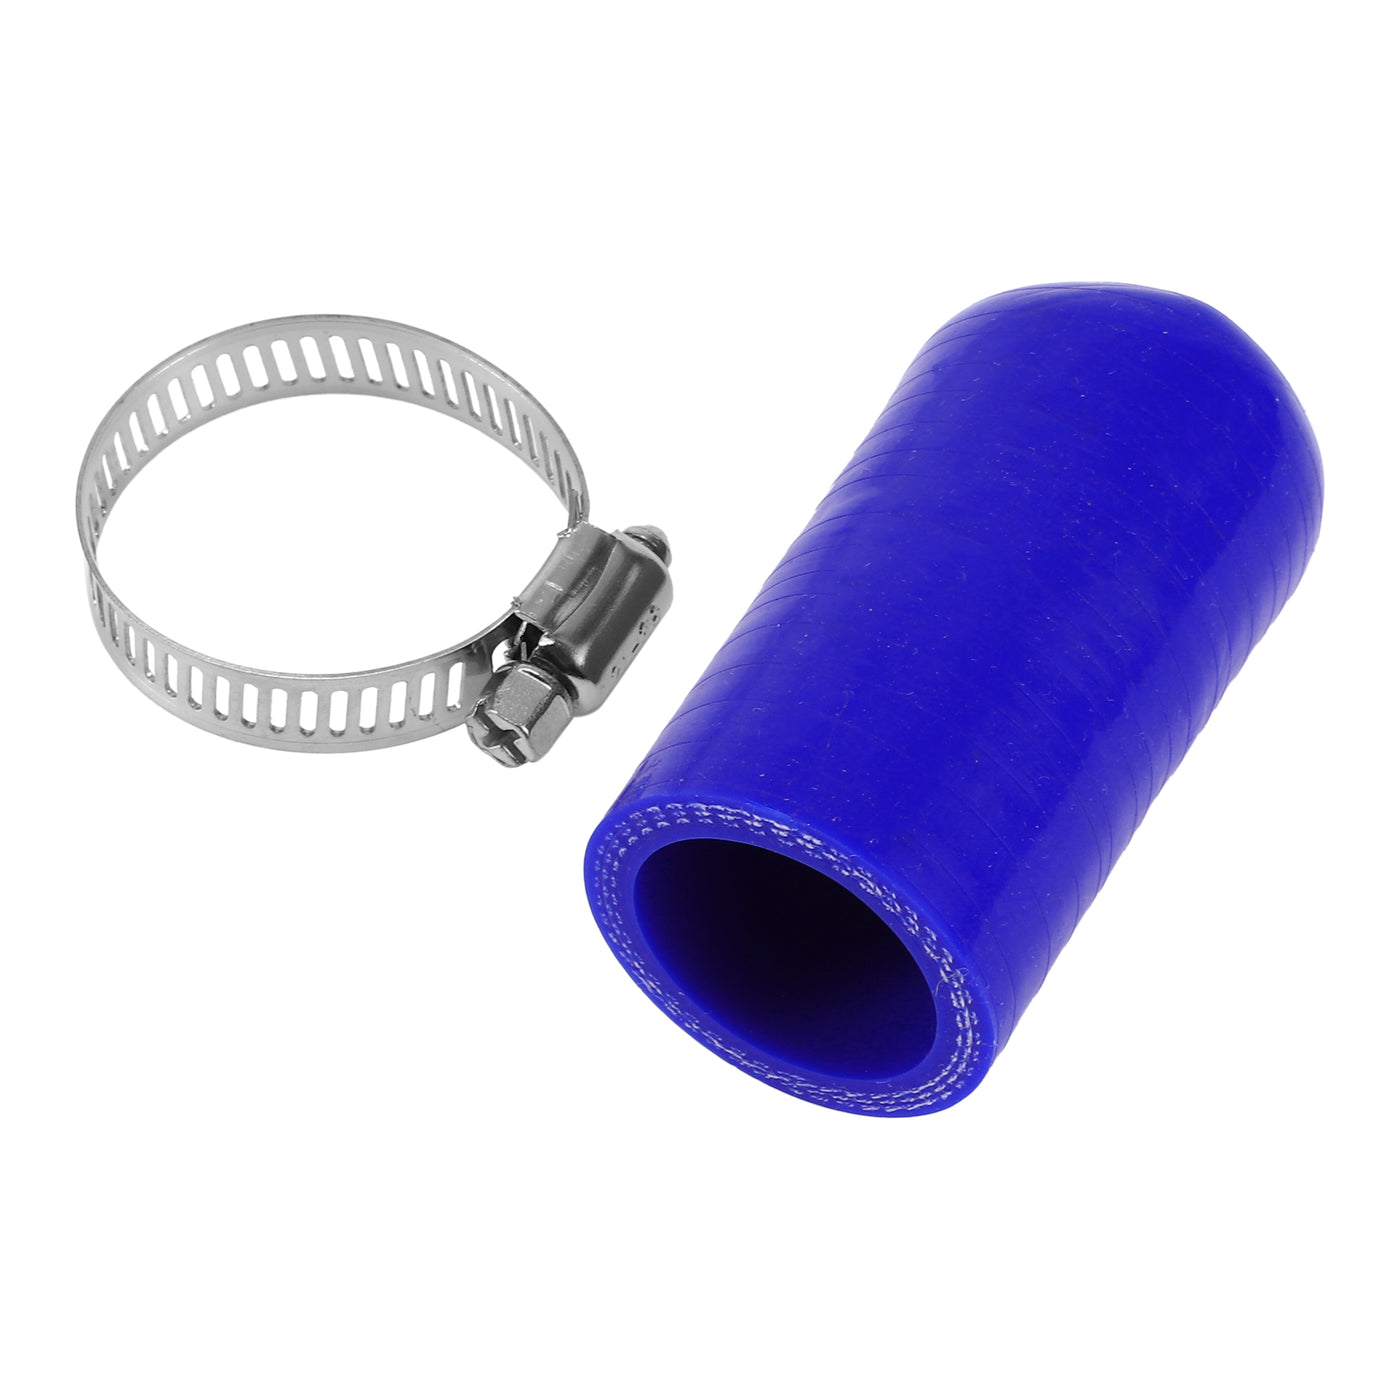 X AUTOHAUX 1 Pcs 60mm Length 28mm/1.10" ID Blue Car Silicone Rubber Hose End Cap with Clamp Silicone Reinforced Blanking Cap for Bypass Tube Universal